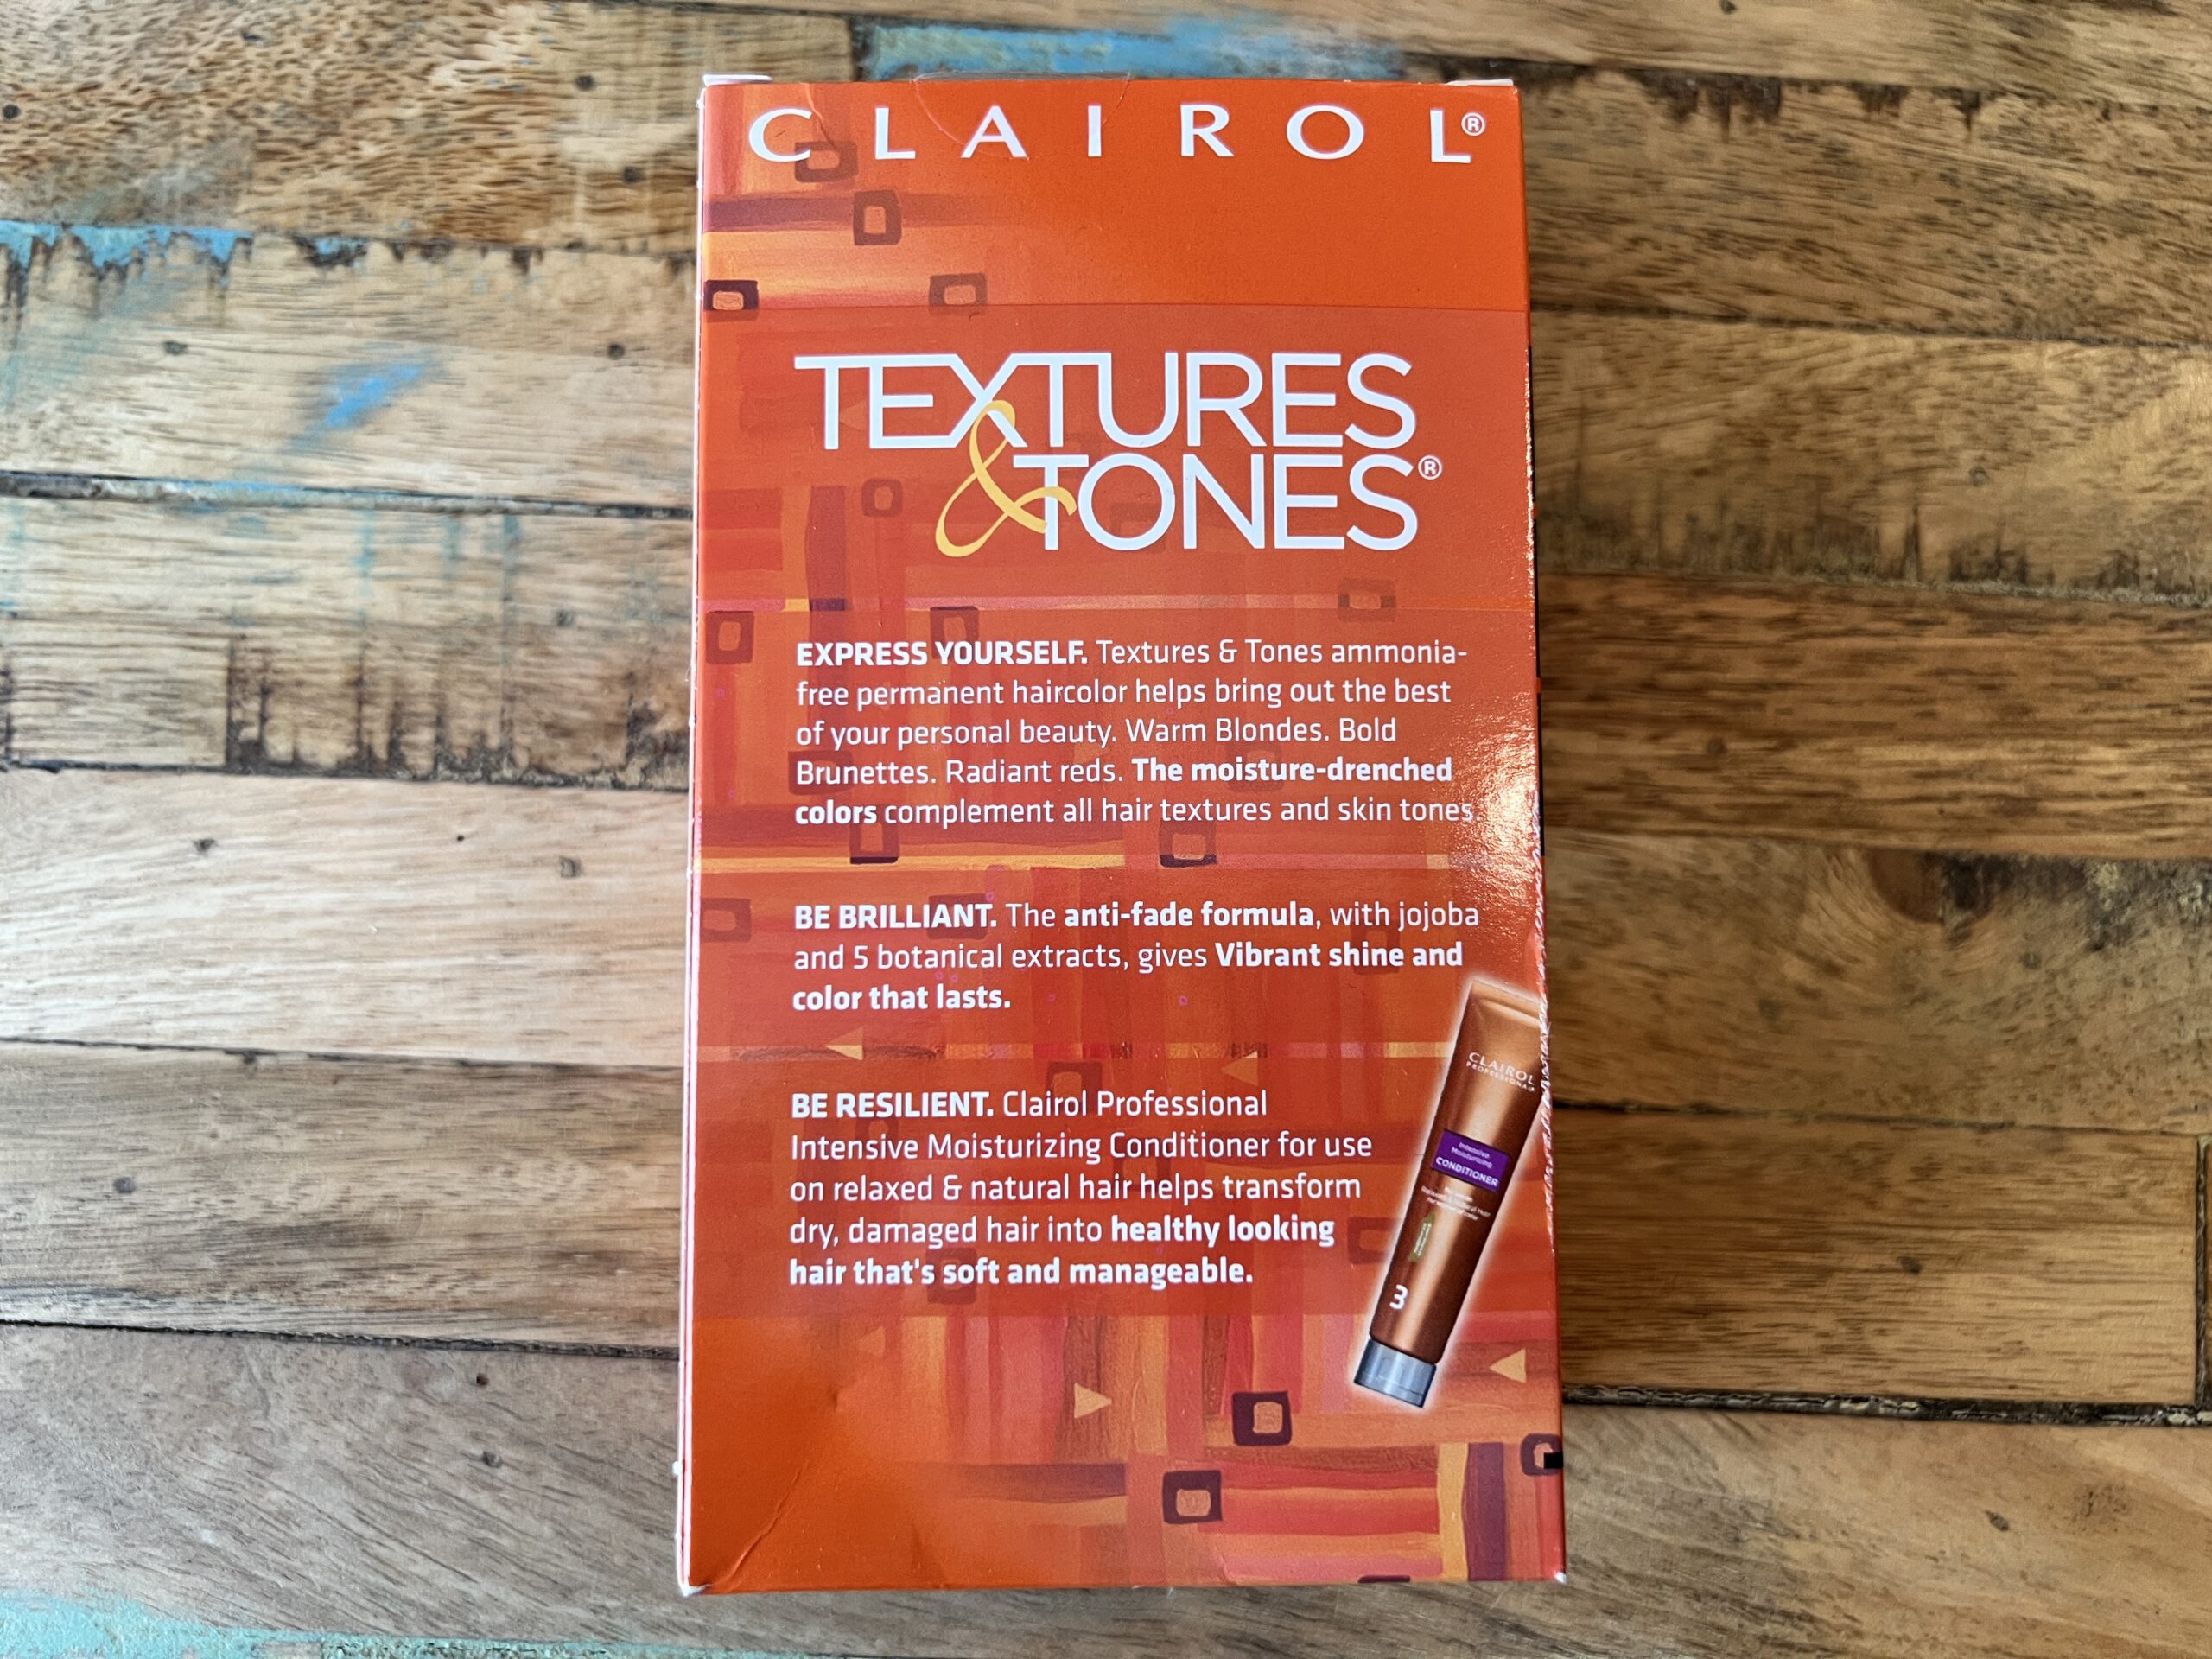 Textures and Tones hair dye encourages you to express yourself and be brilliant.